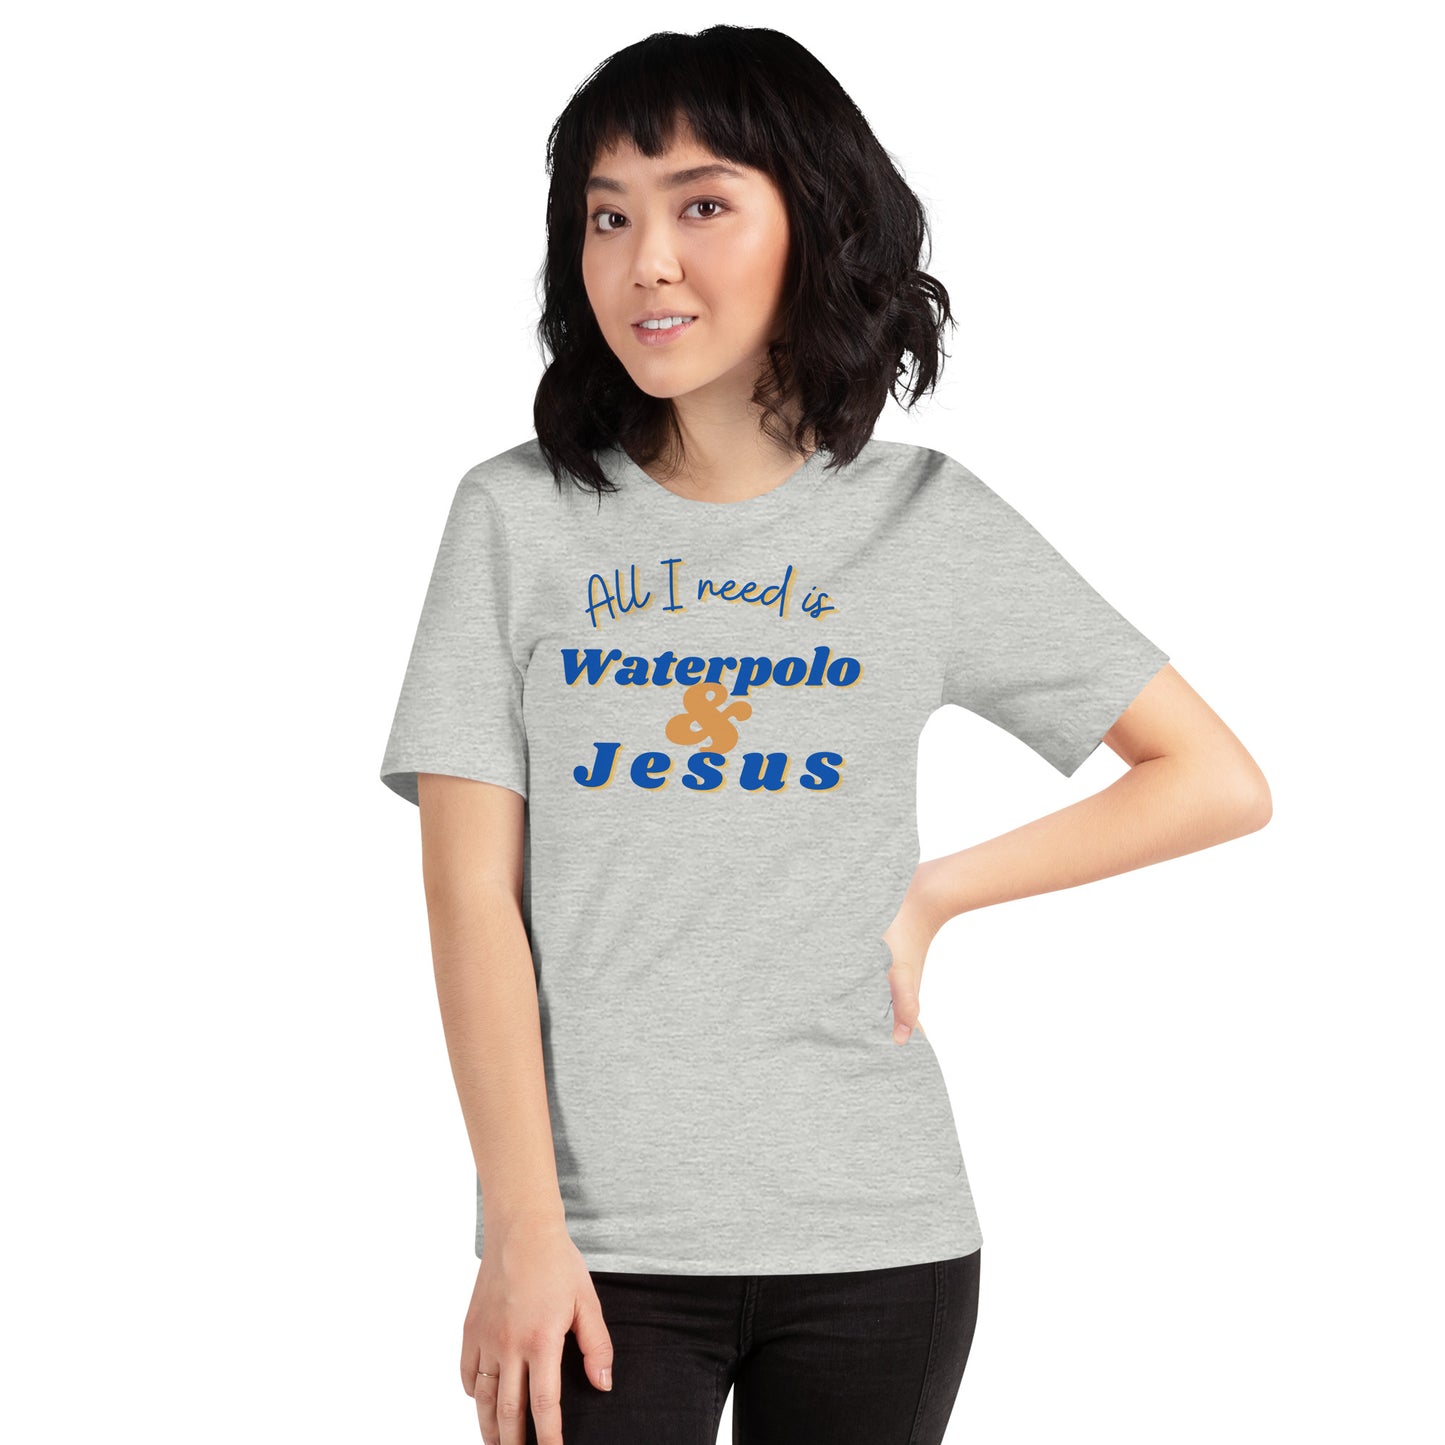 All I Need is Waterpolo and Jesus - Unisex Soft T-shirt - Bella Canvas 3001